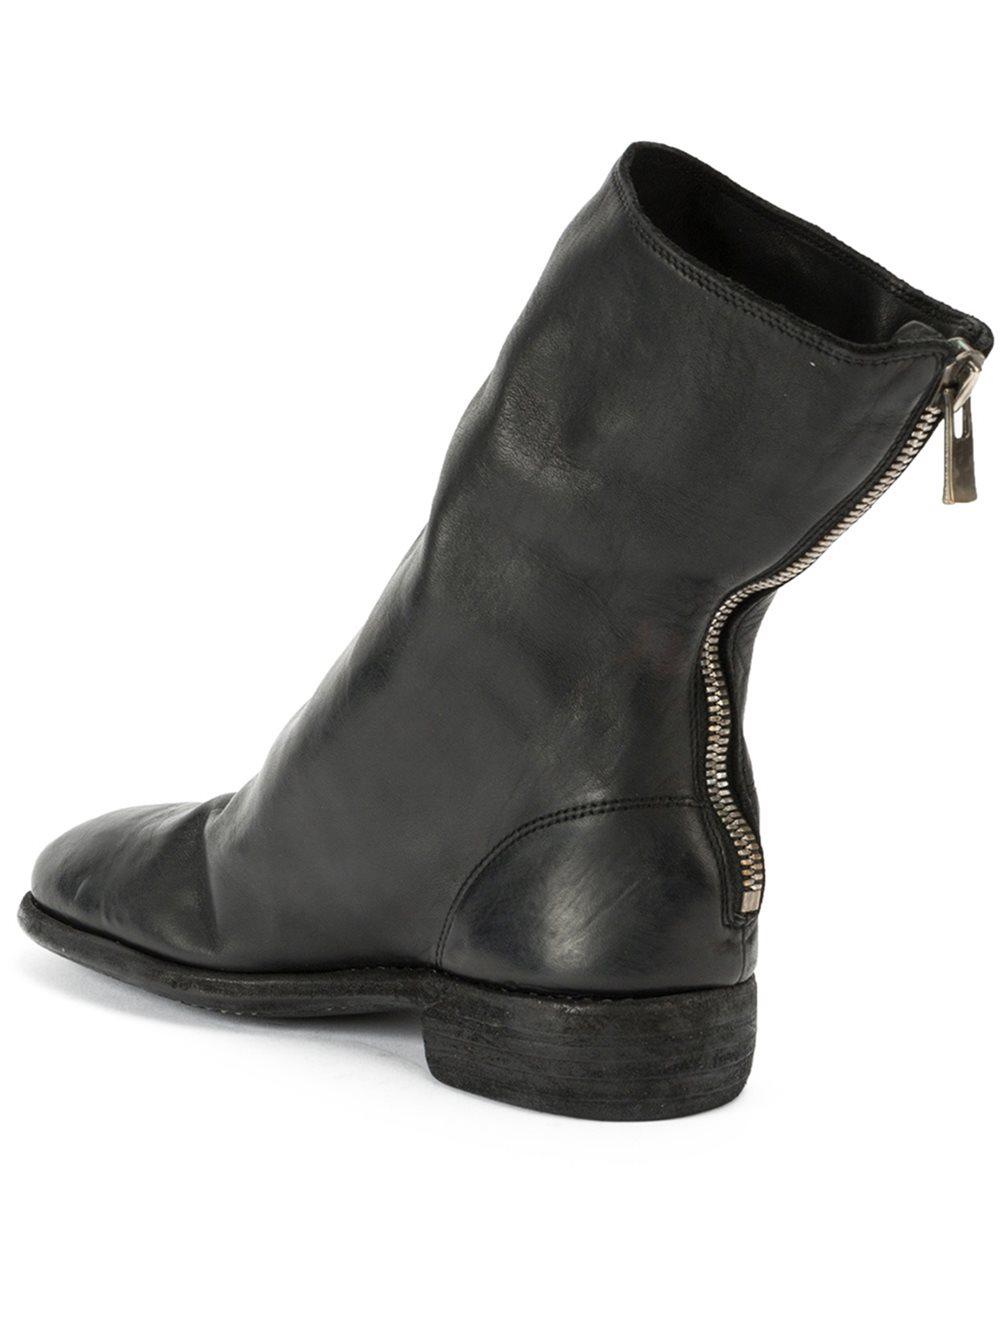 Lyst - Guidi Rear Zip Boots in Black for Men